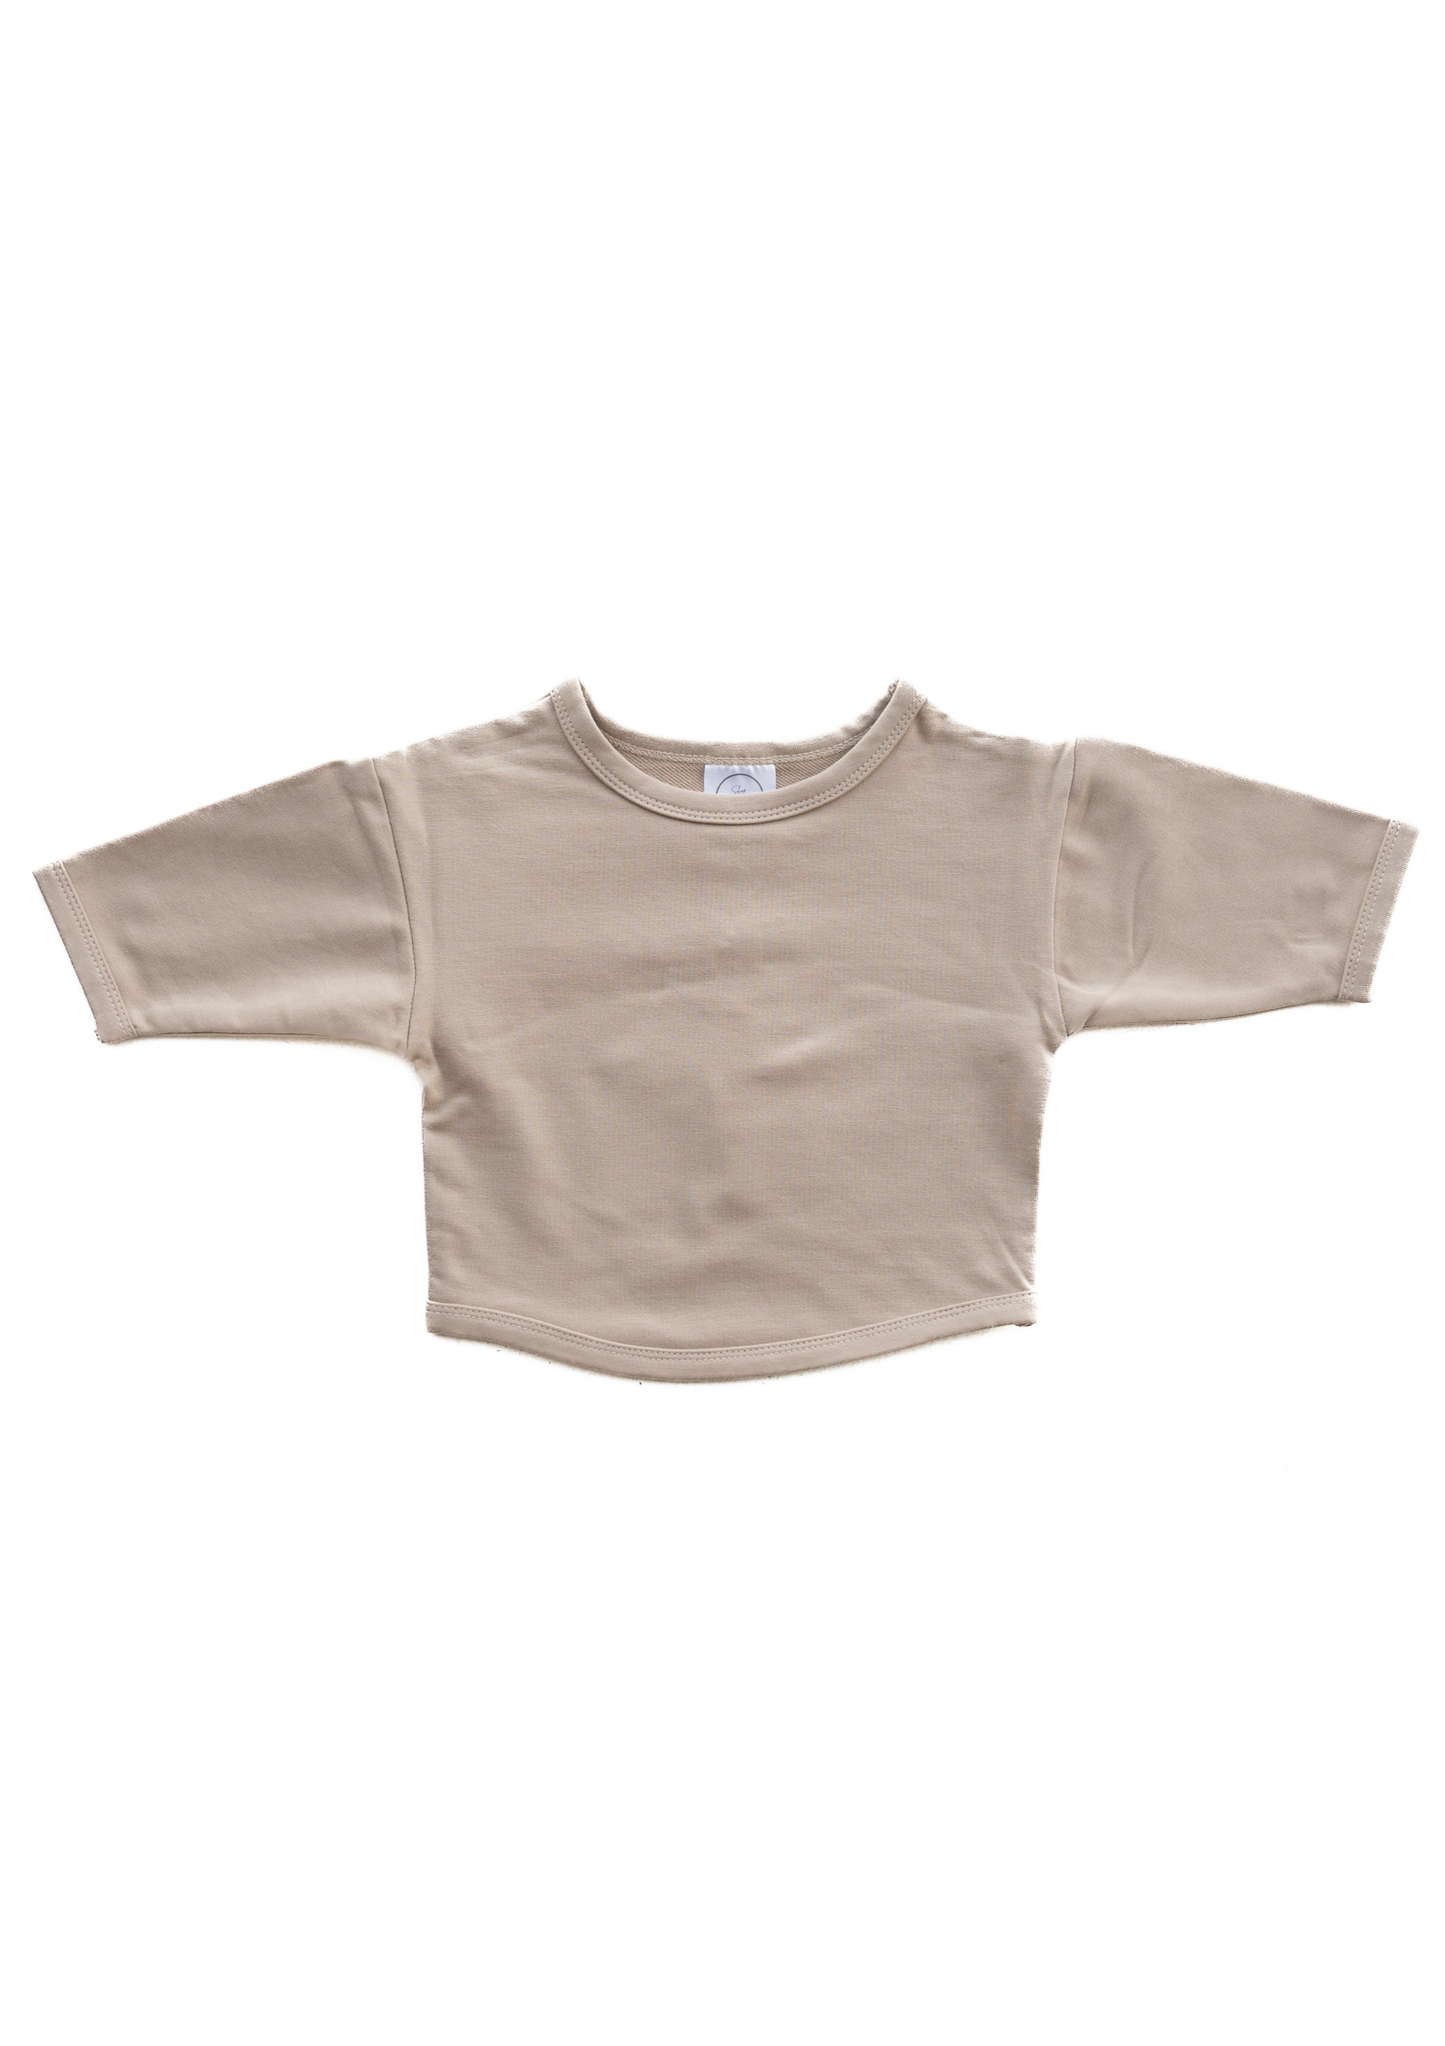 RELAXED LONG SLEEVE TEE IN CHESTNUT